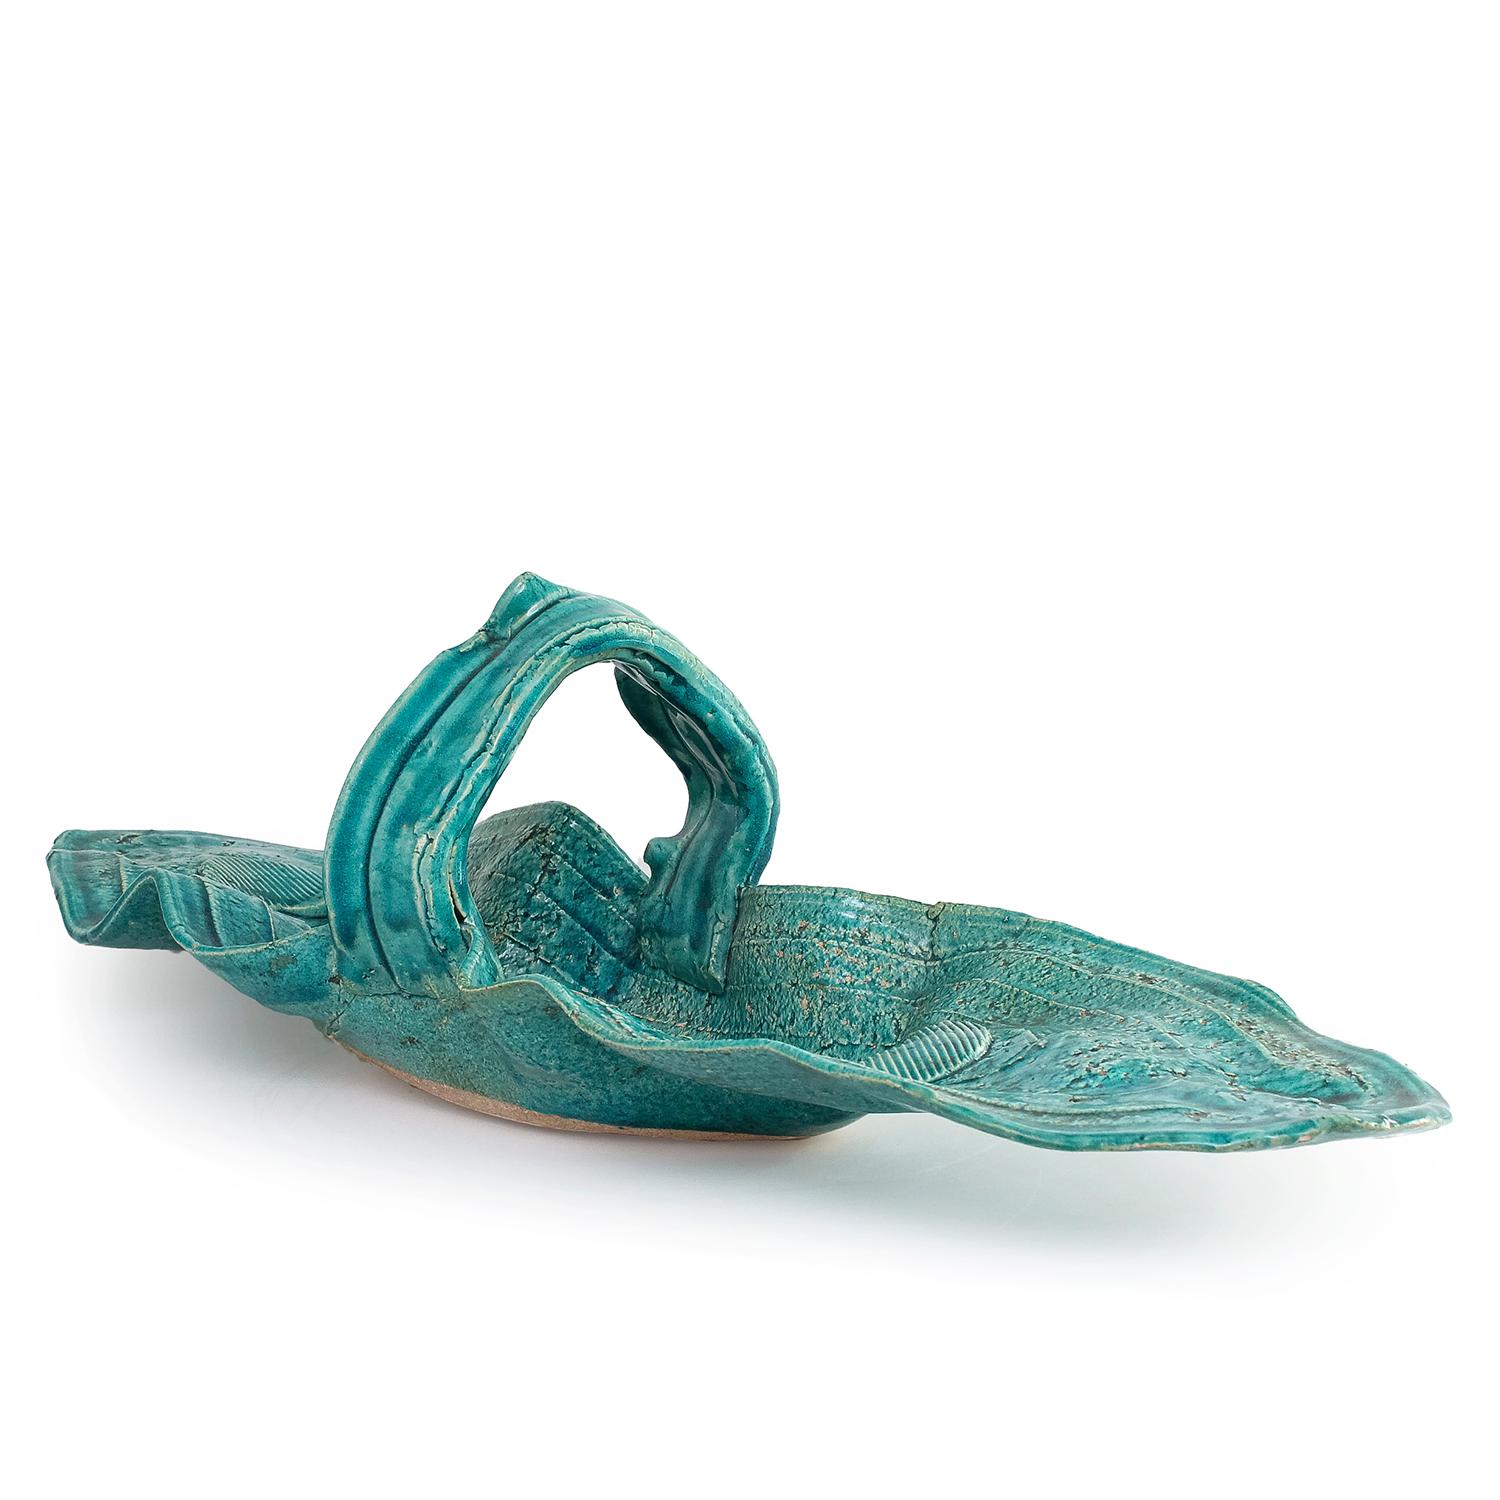 TURQUOISE BASKET (INV# NP3744) - Sculpture by Betty Woodman